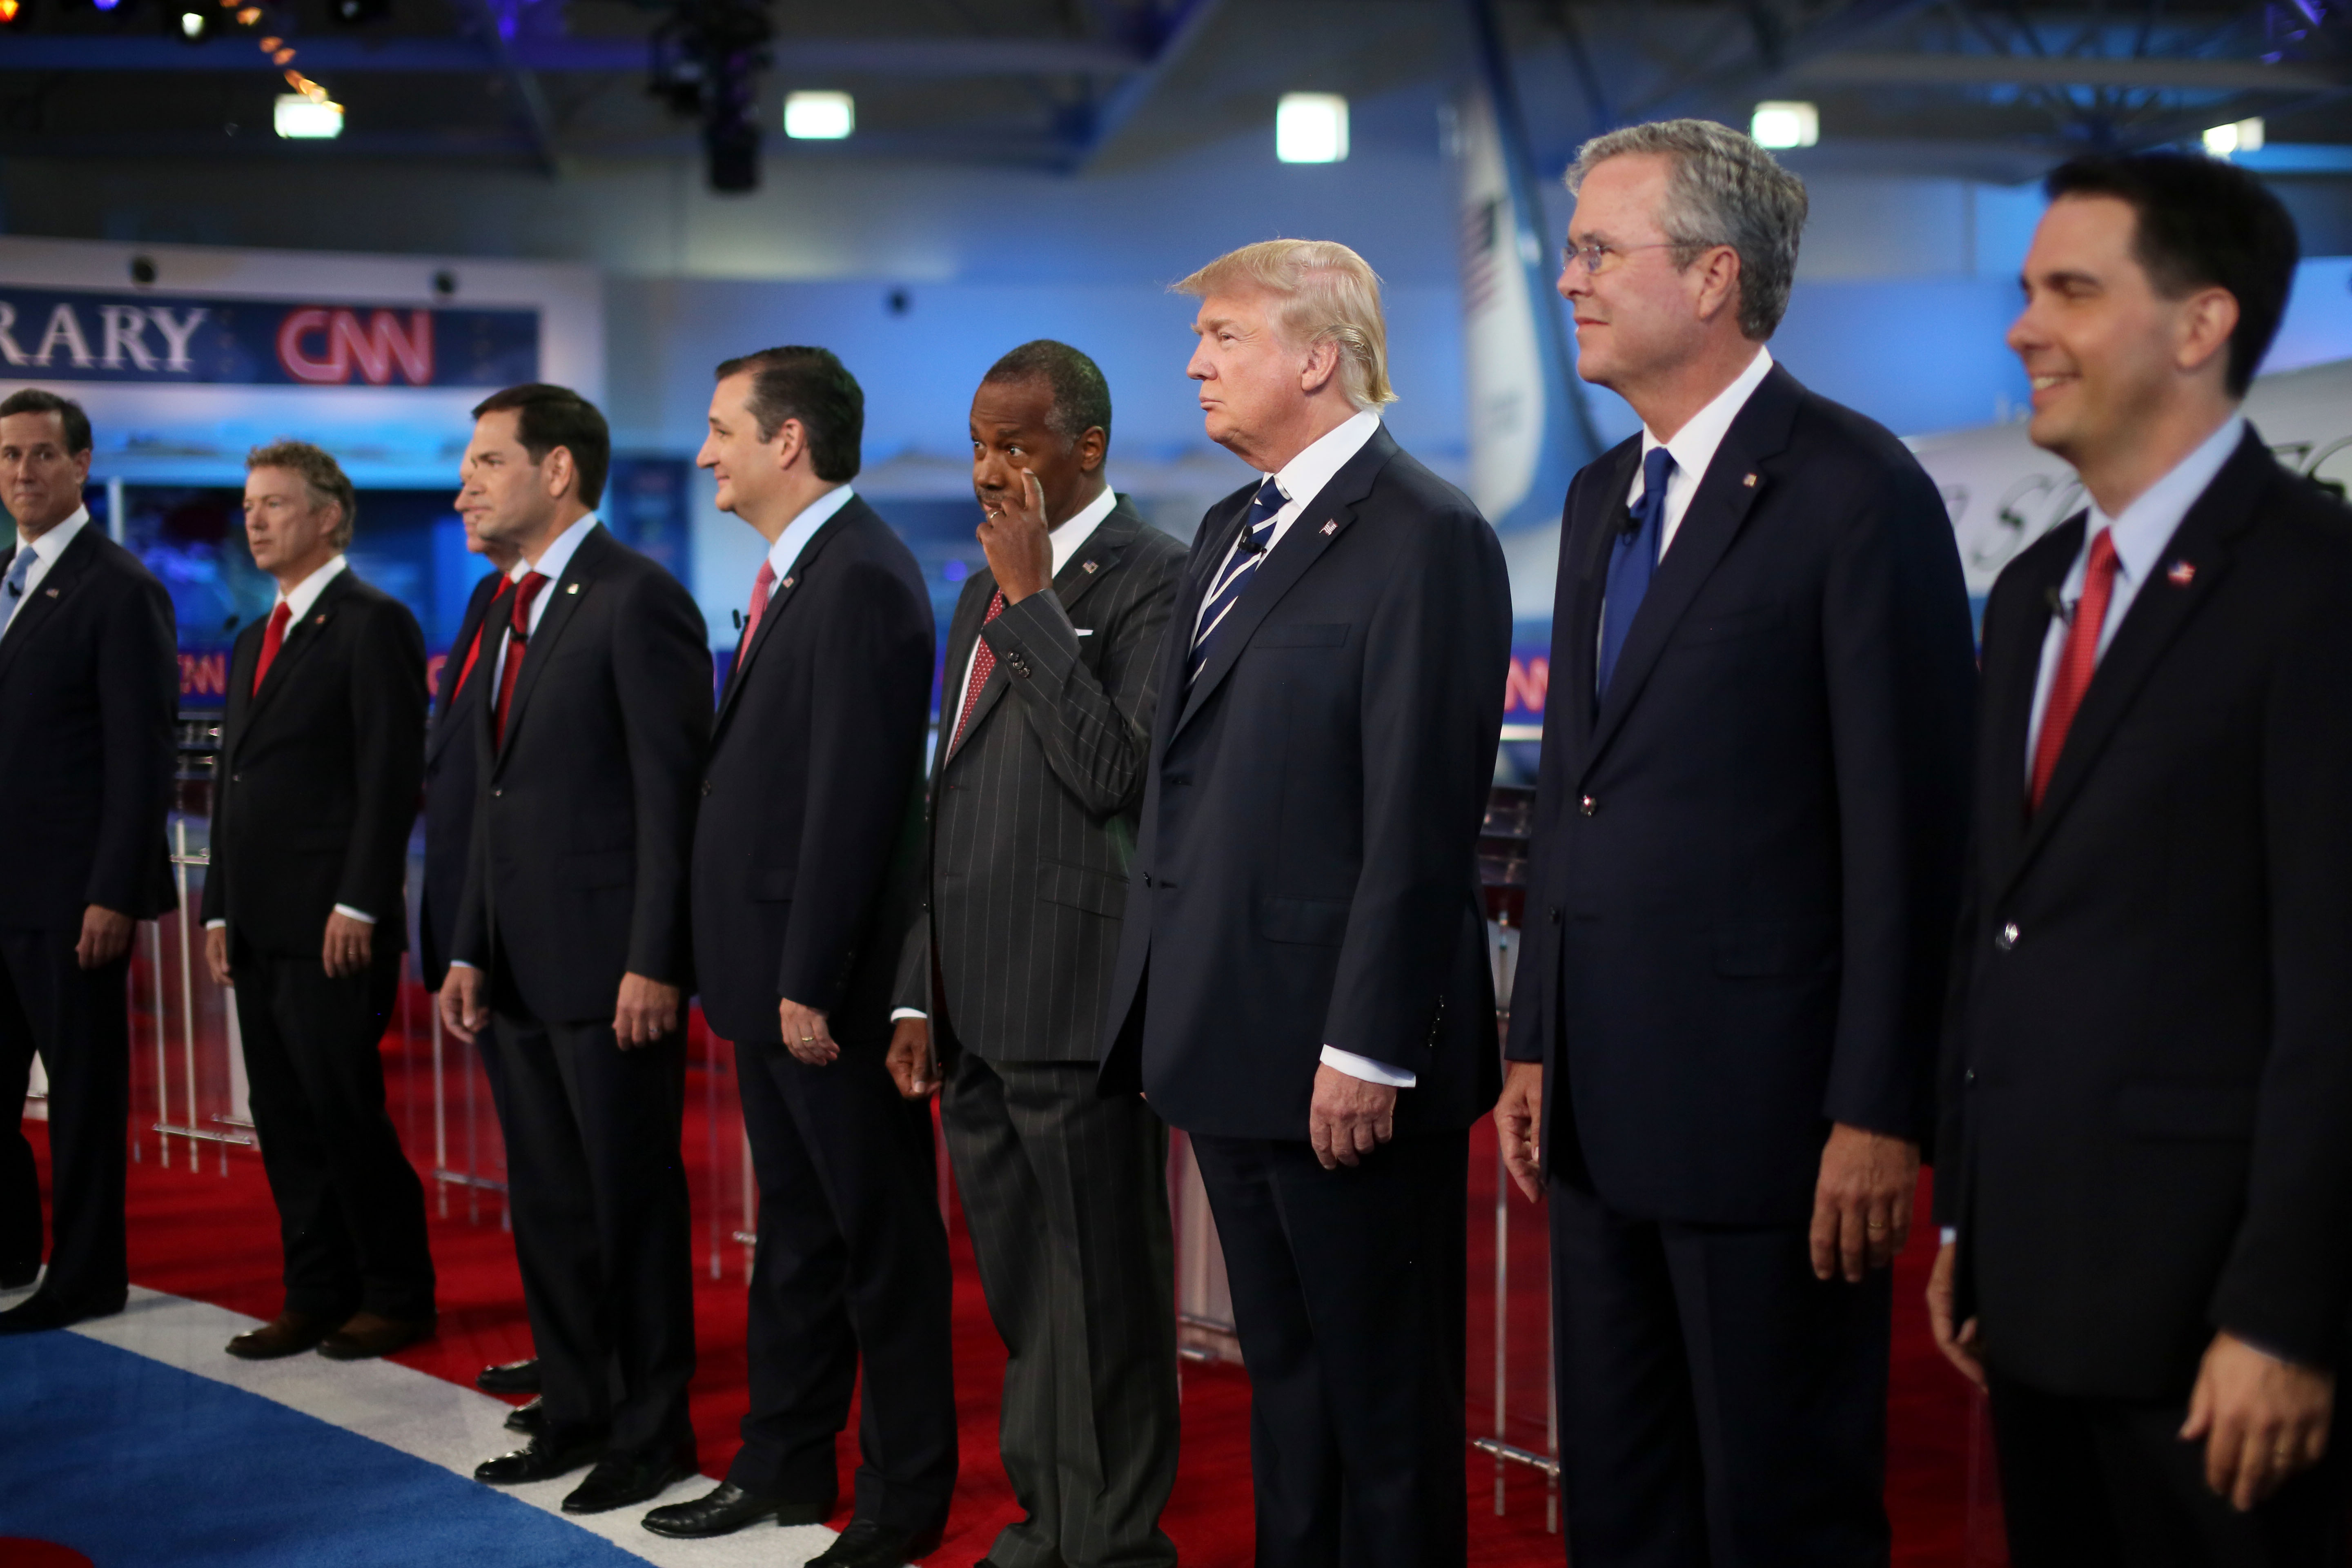 The candidates. (Photo: Sandy Huffaker/Getty Images)